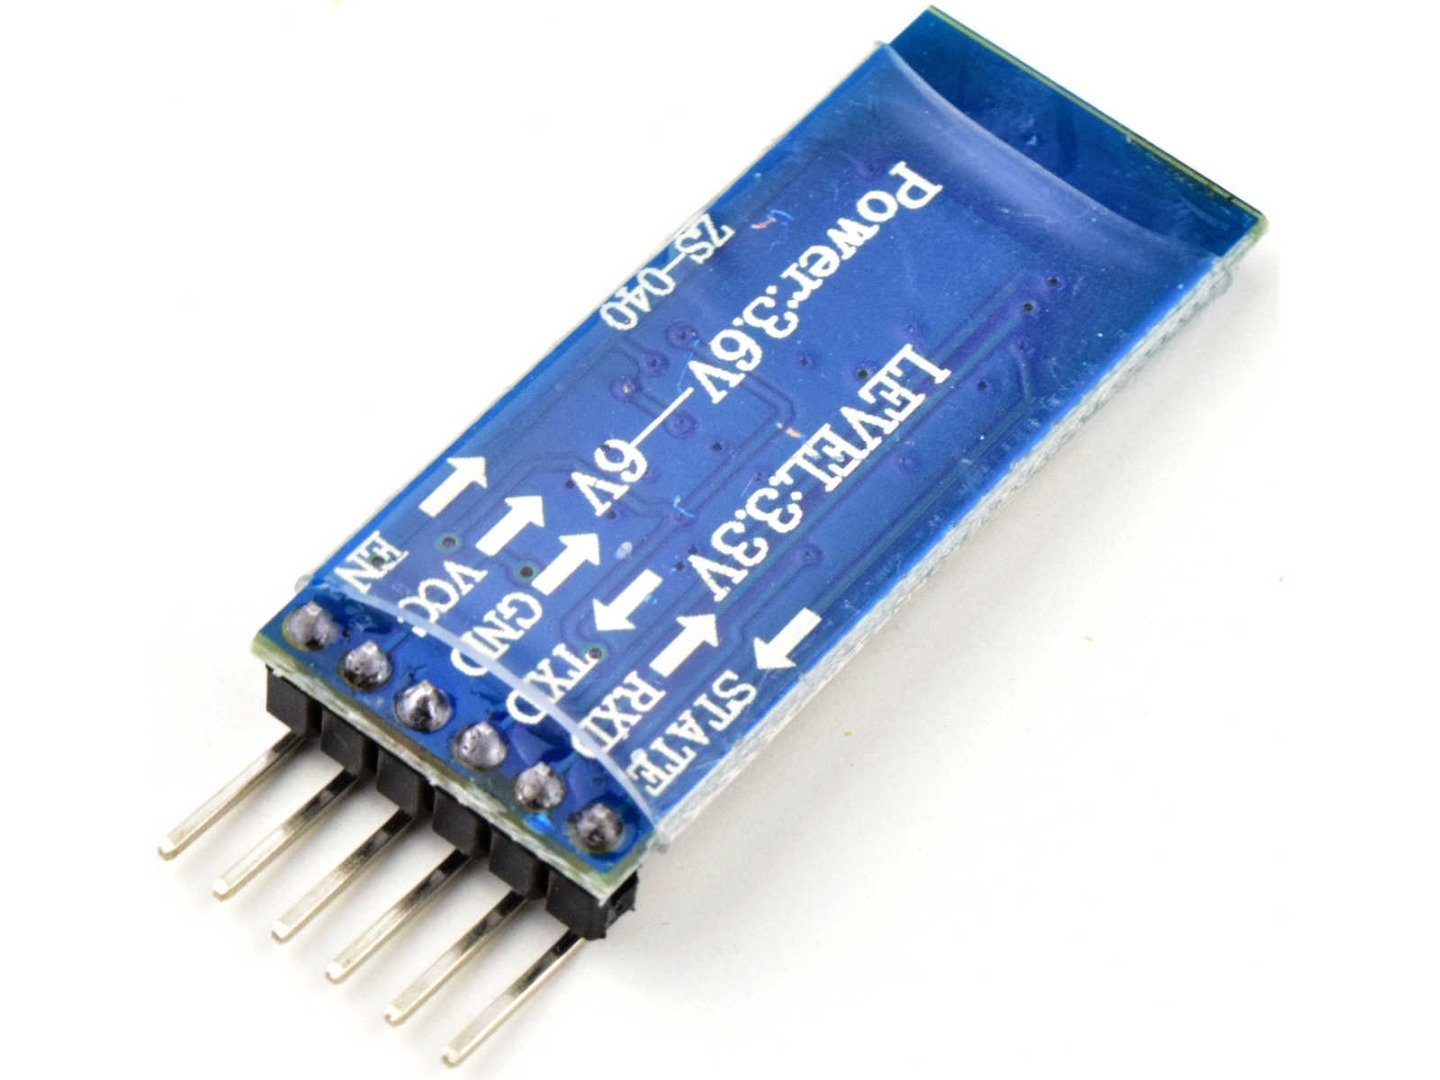 HC-10 Bluetooth 4.0 BLE Module with TI CC2541 chipset 11